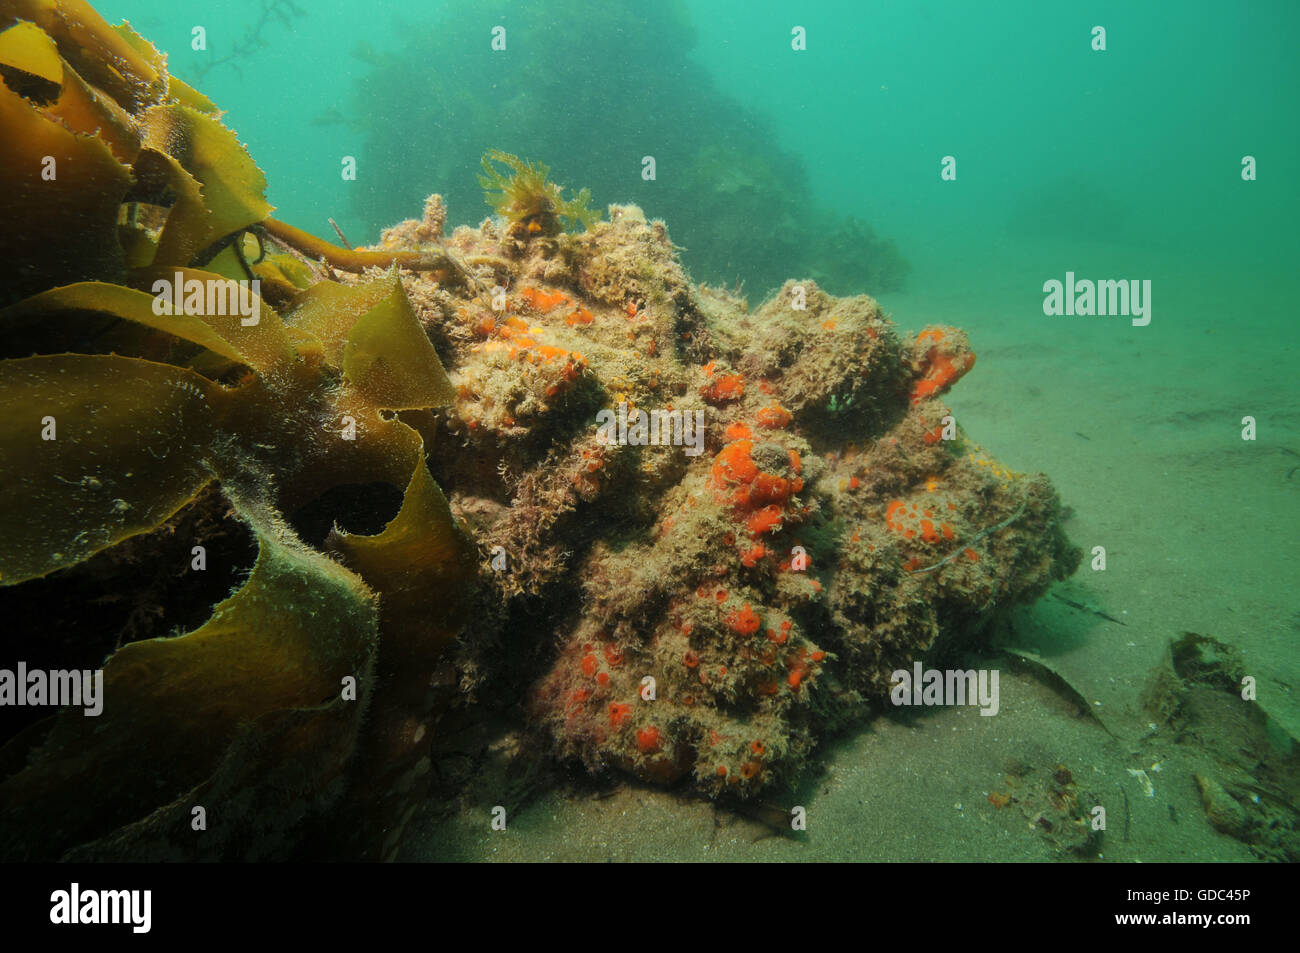 Red sponges struggling with sediment Stock Photo